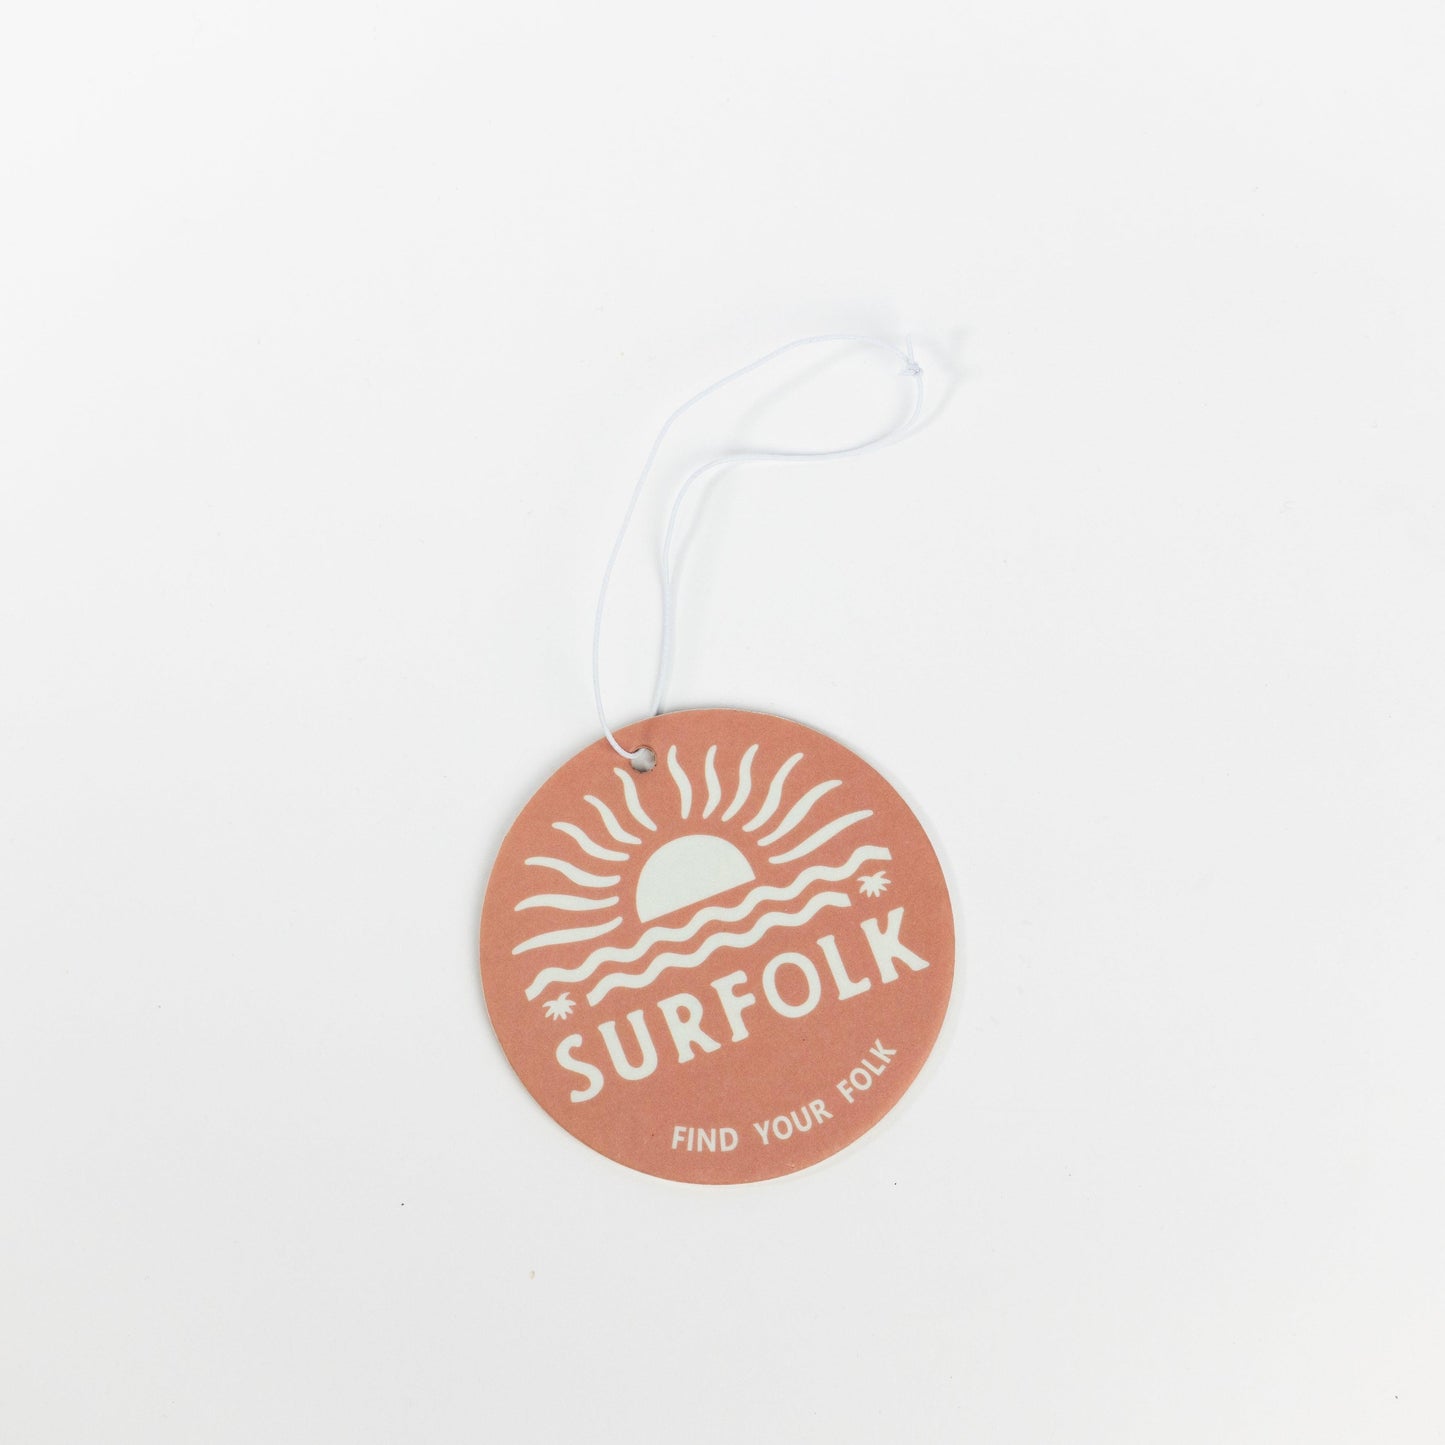 Coconut surf scented car air freshener for the van or 4WD to take on road trips hanging from rear vision mirror ready for road trips along the coast made from recyclable and sustainable materials find your folk 